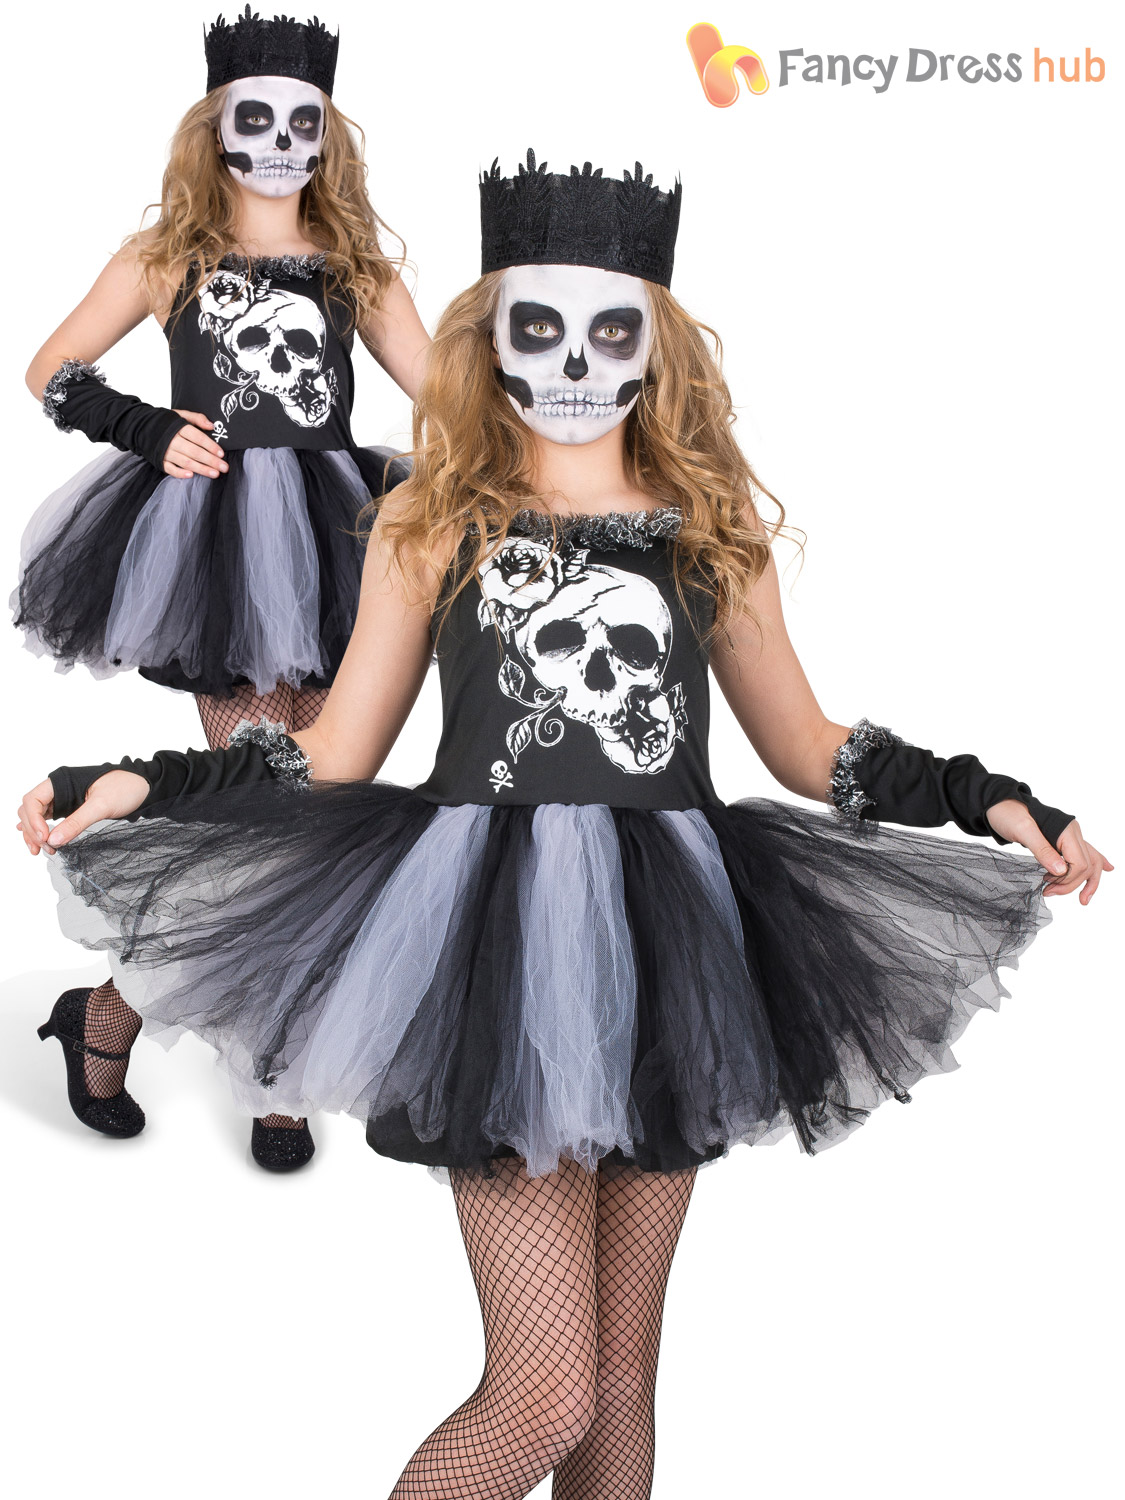 SKELETON GIRL HALLOWEEN OUTFIT RAINBOW TUTU DAY OF THE DEAD FANCY DRESS COSTUME 